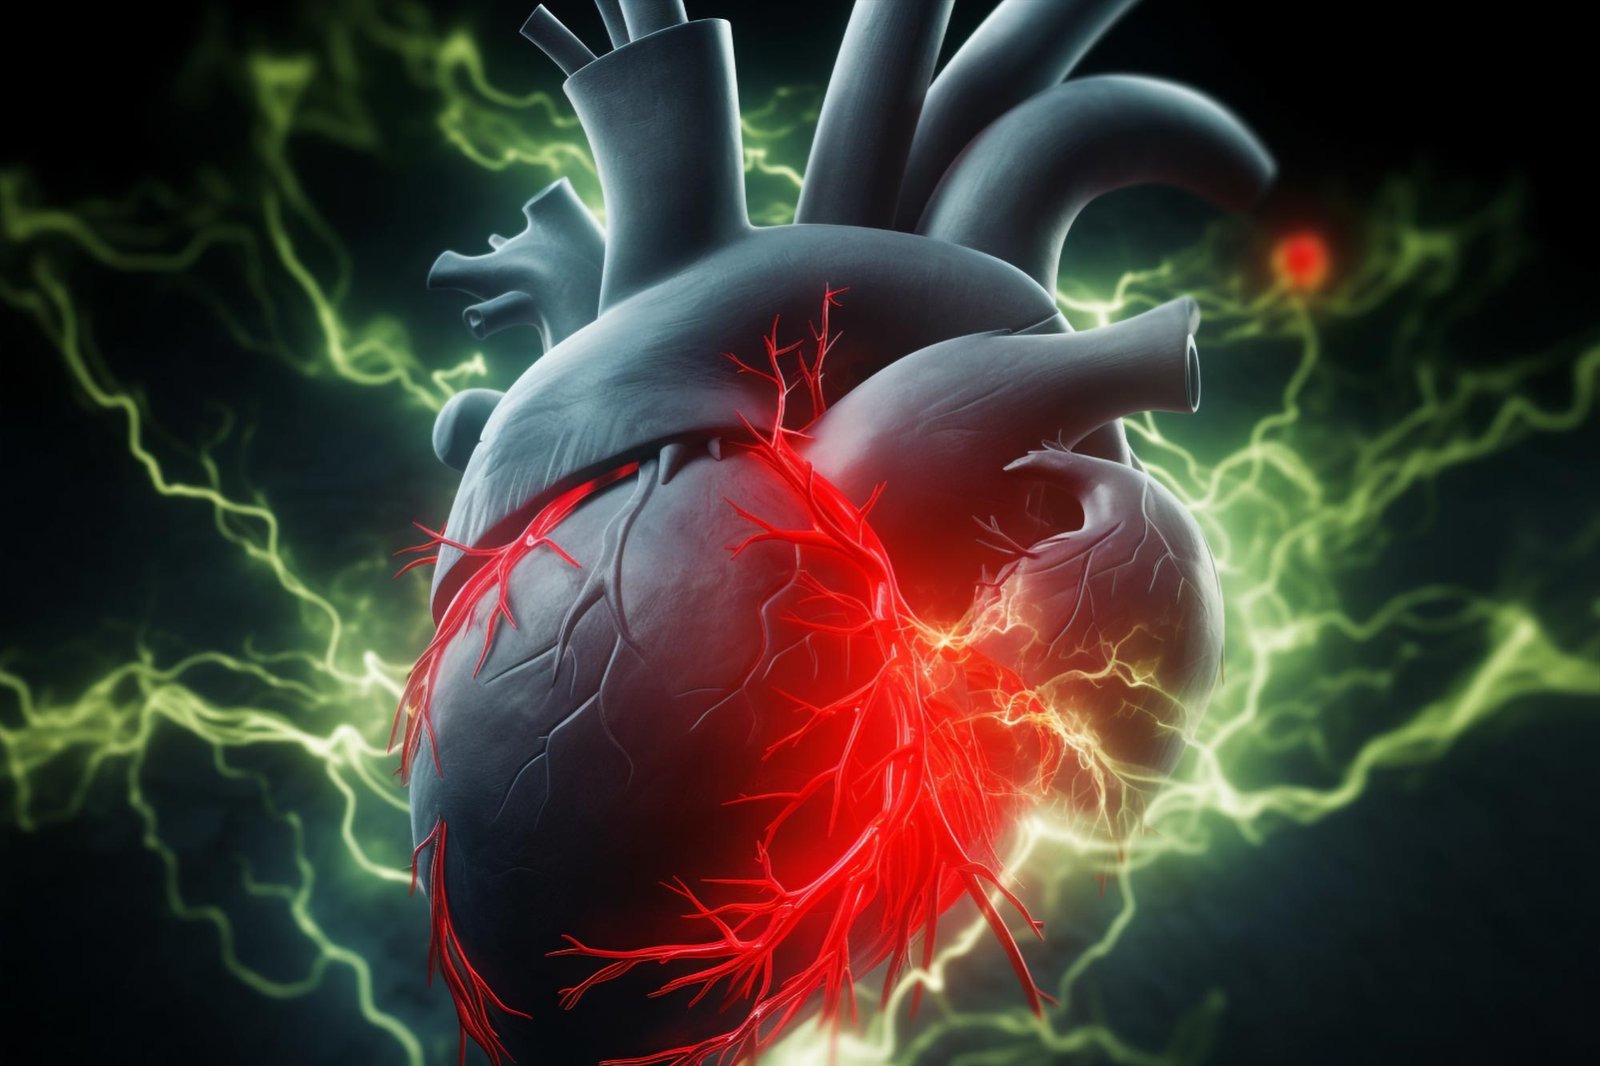 Think Smoking Cannabis Won’t Damage Your Heart? Think Again